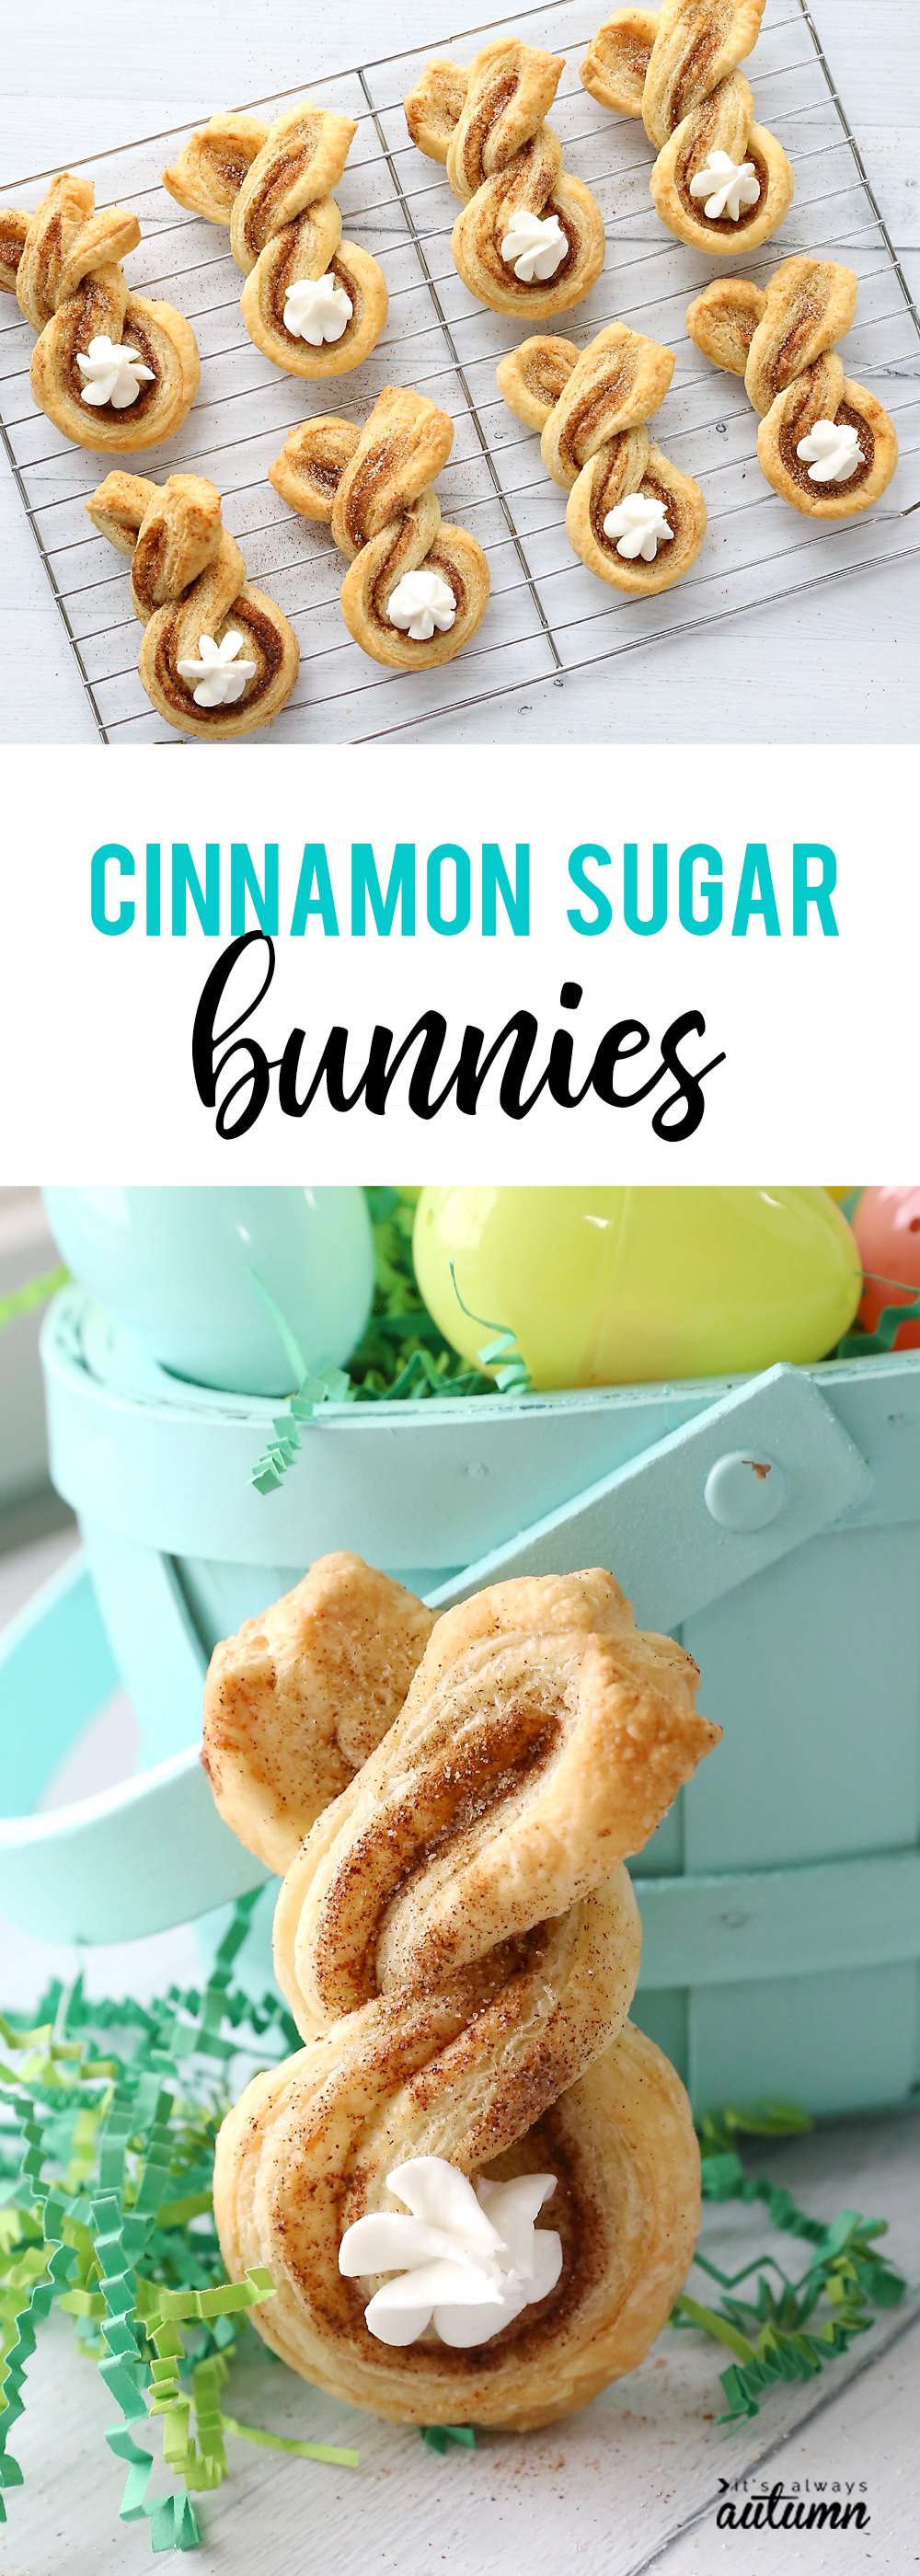 Cinnamon sugar Easter bunny twists are a fun, easy Easter treat to make with your kids.